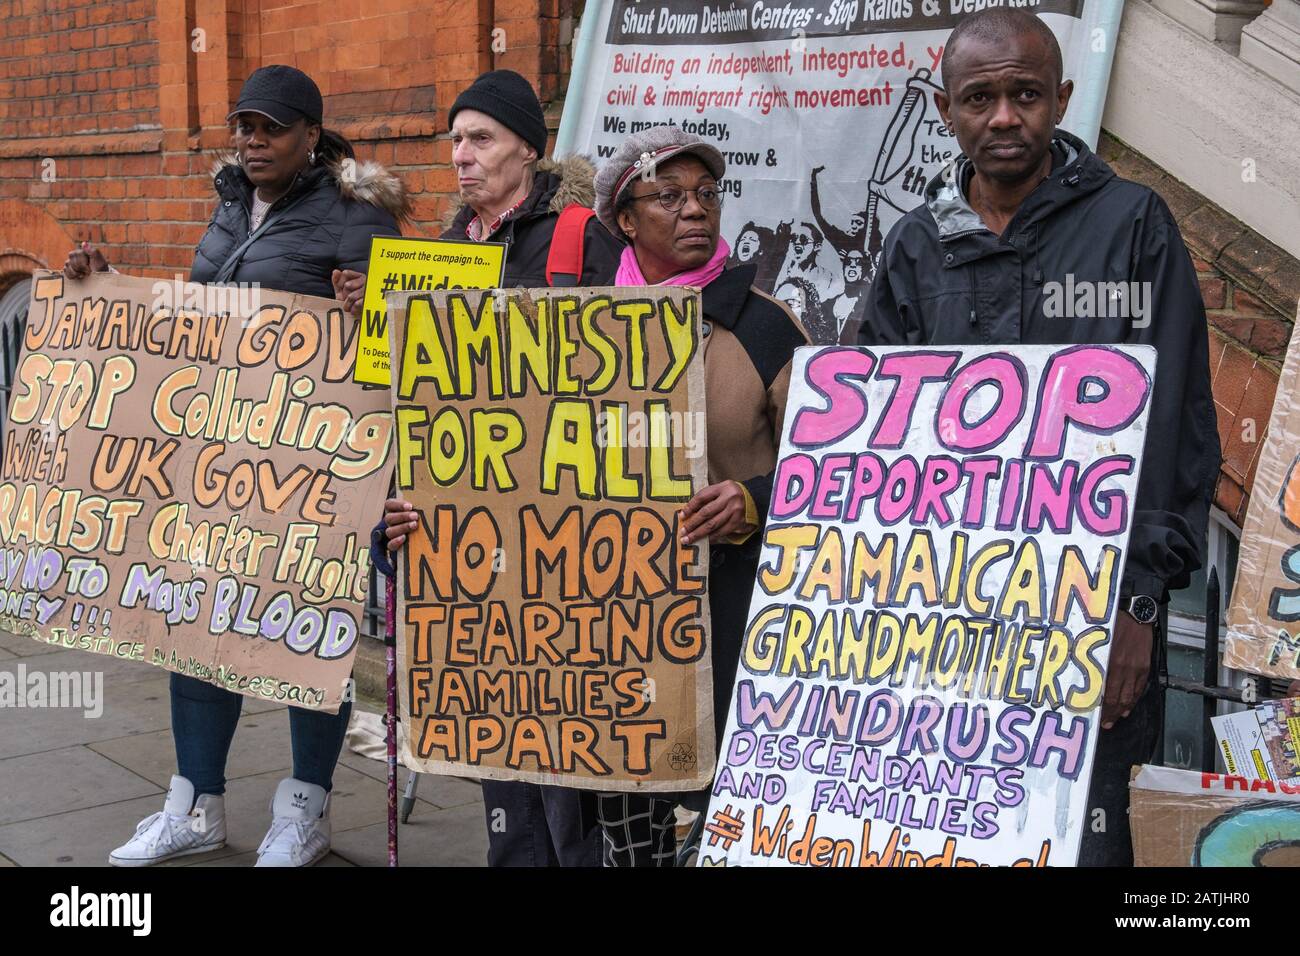 London, UK. 3rd February 2020. Movement for Justice lead a protest outside the Jamaican High Commission demanding Jamaica end accepting Britain's racist deportation flights. They say these are a modern equivalent of slave ships, with deportees manacled between guards for the flight. Those seized include many from Windrush families who have lived here most of their lives but are unable to produce the exhaustive paperwork demanded and seldom have the chance to properly contest their case. Peter Marshall/Alamy Live News Stock Photo